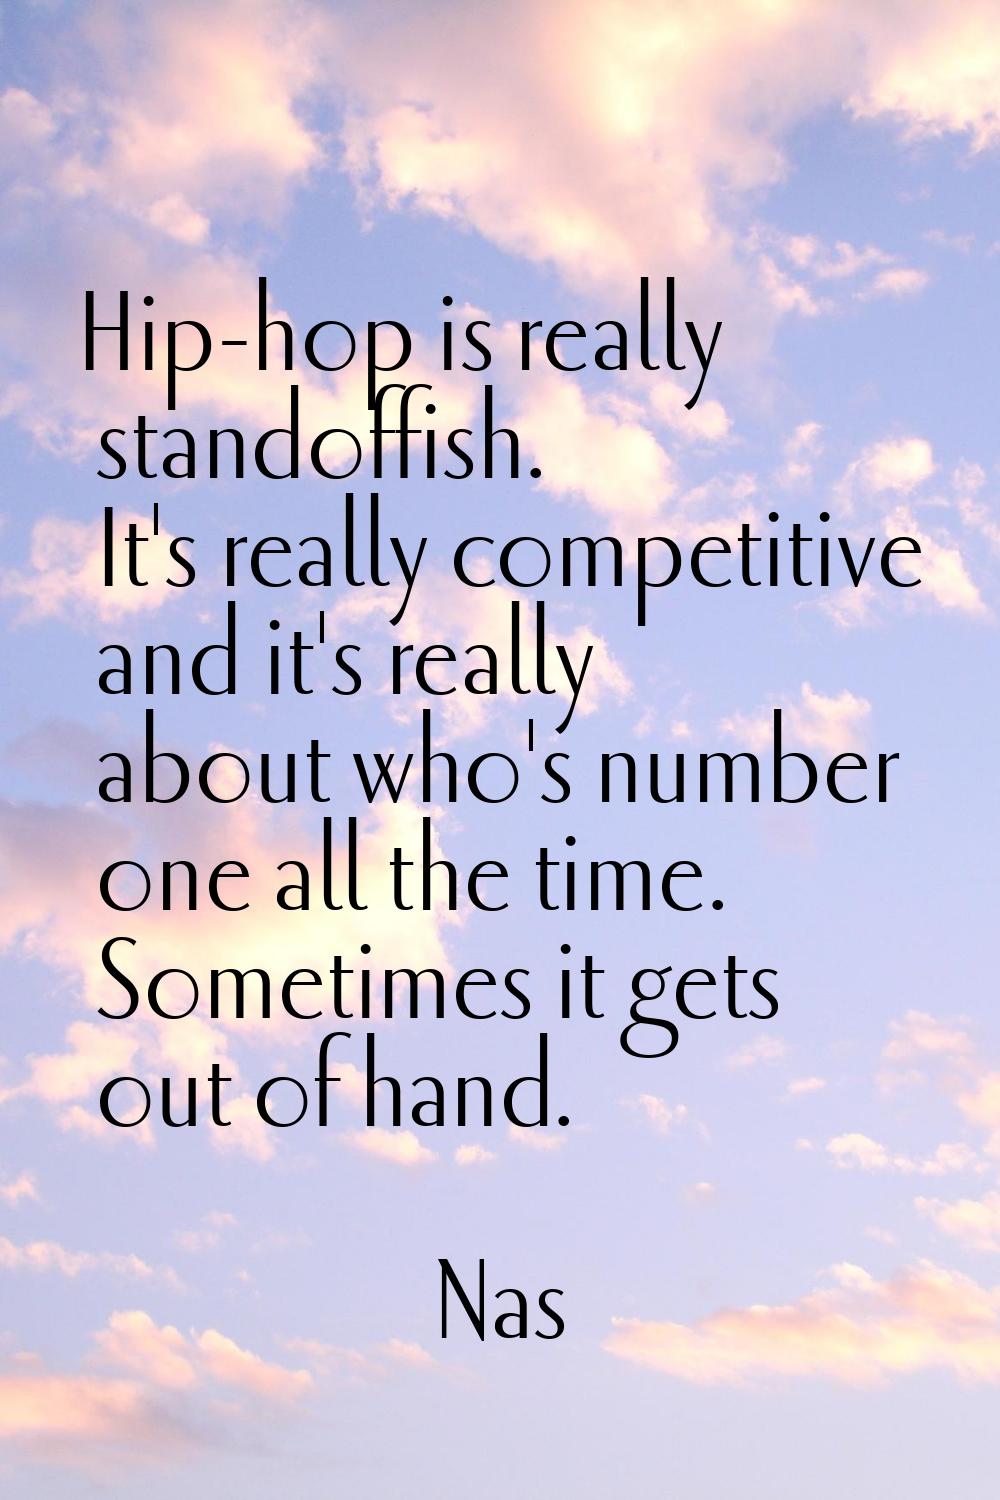 Hip-hop is really standoffish. It's really competitive and it's really about who's number one all t